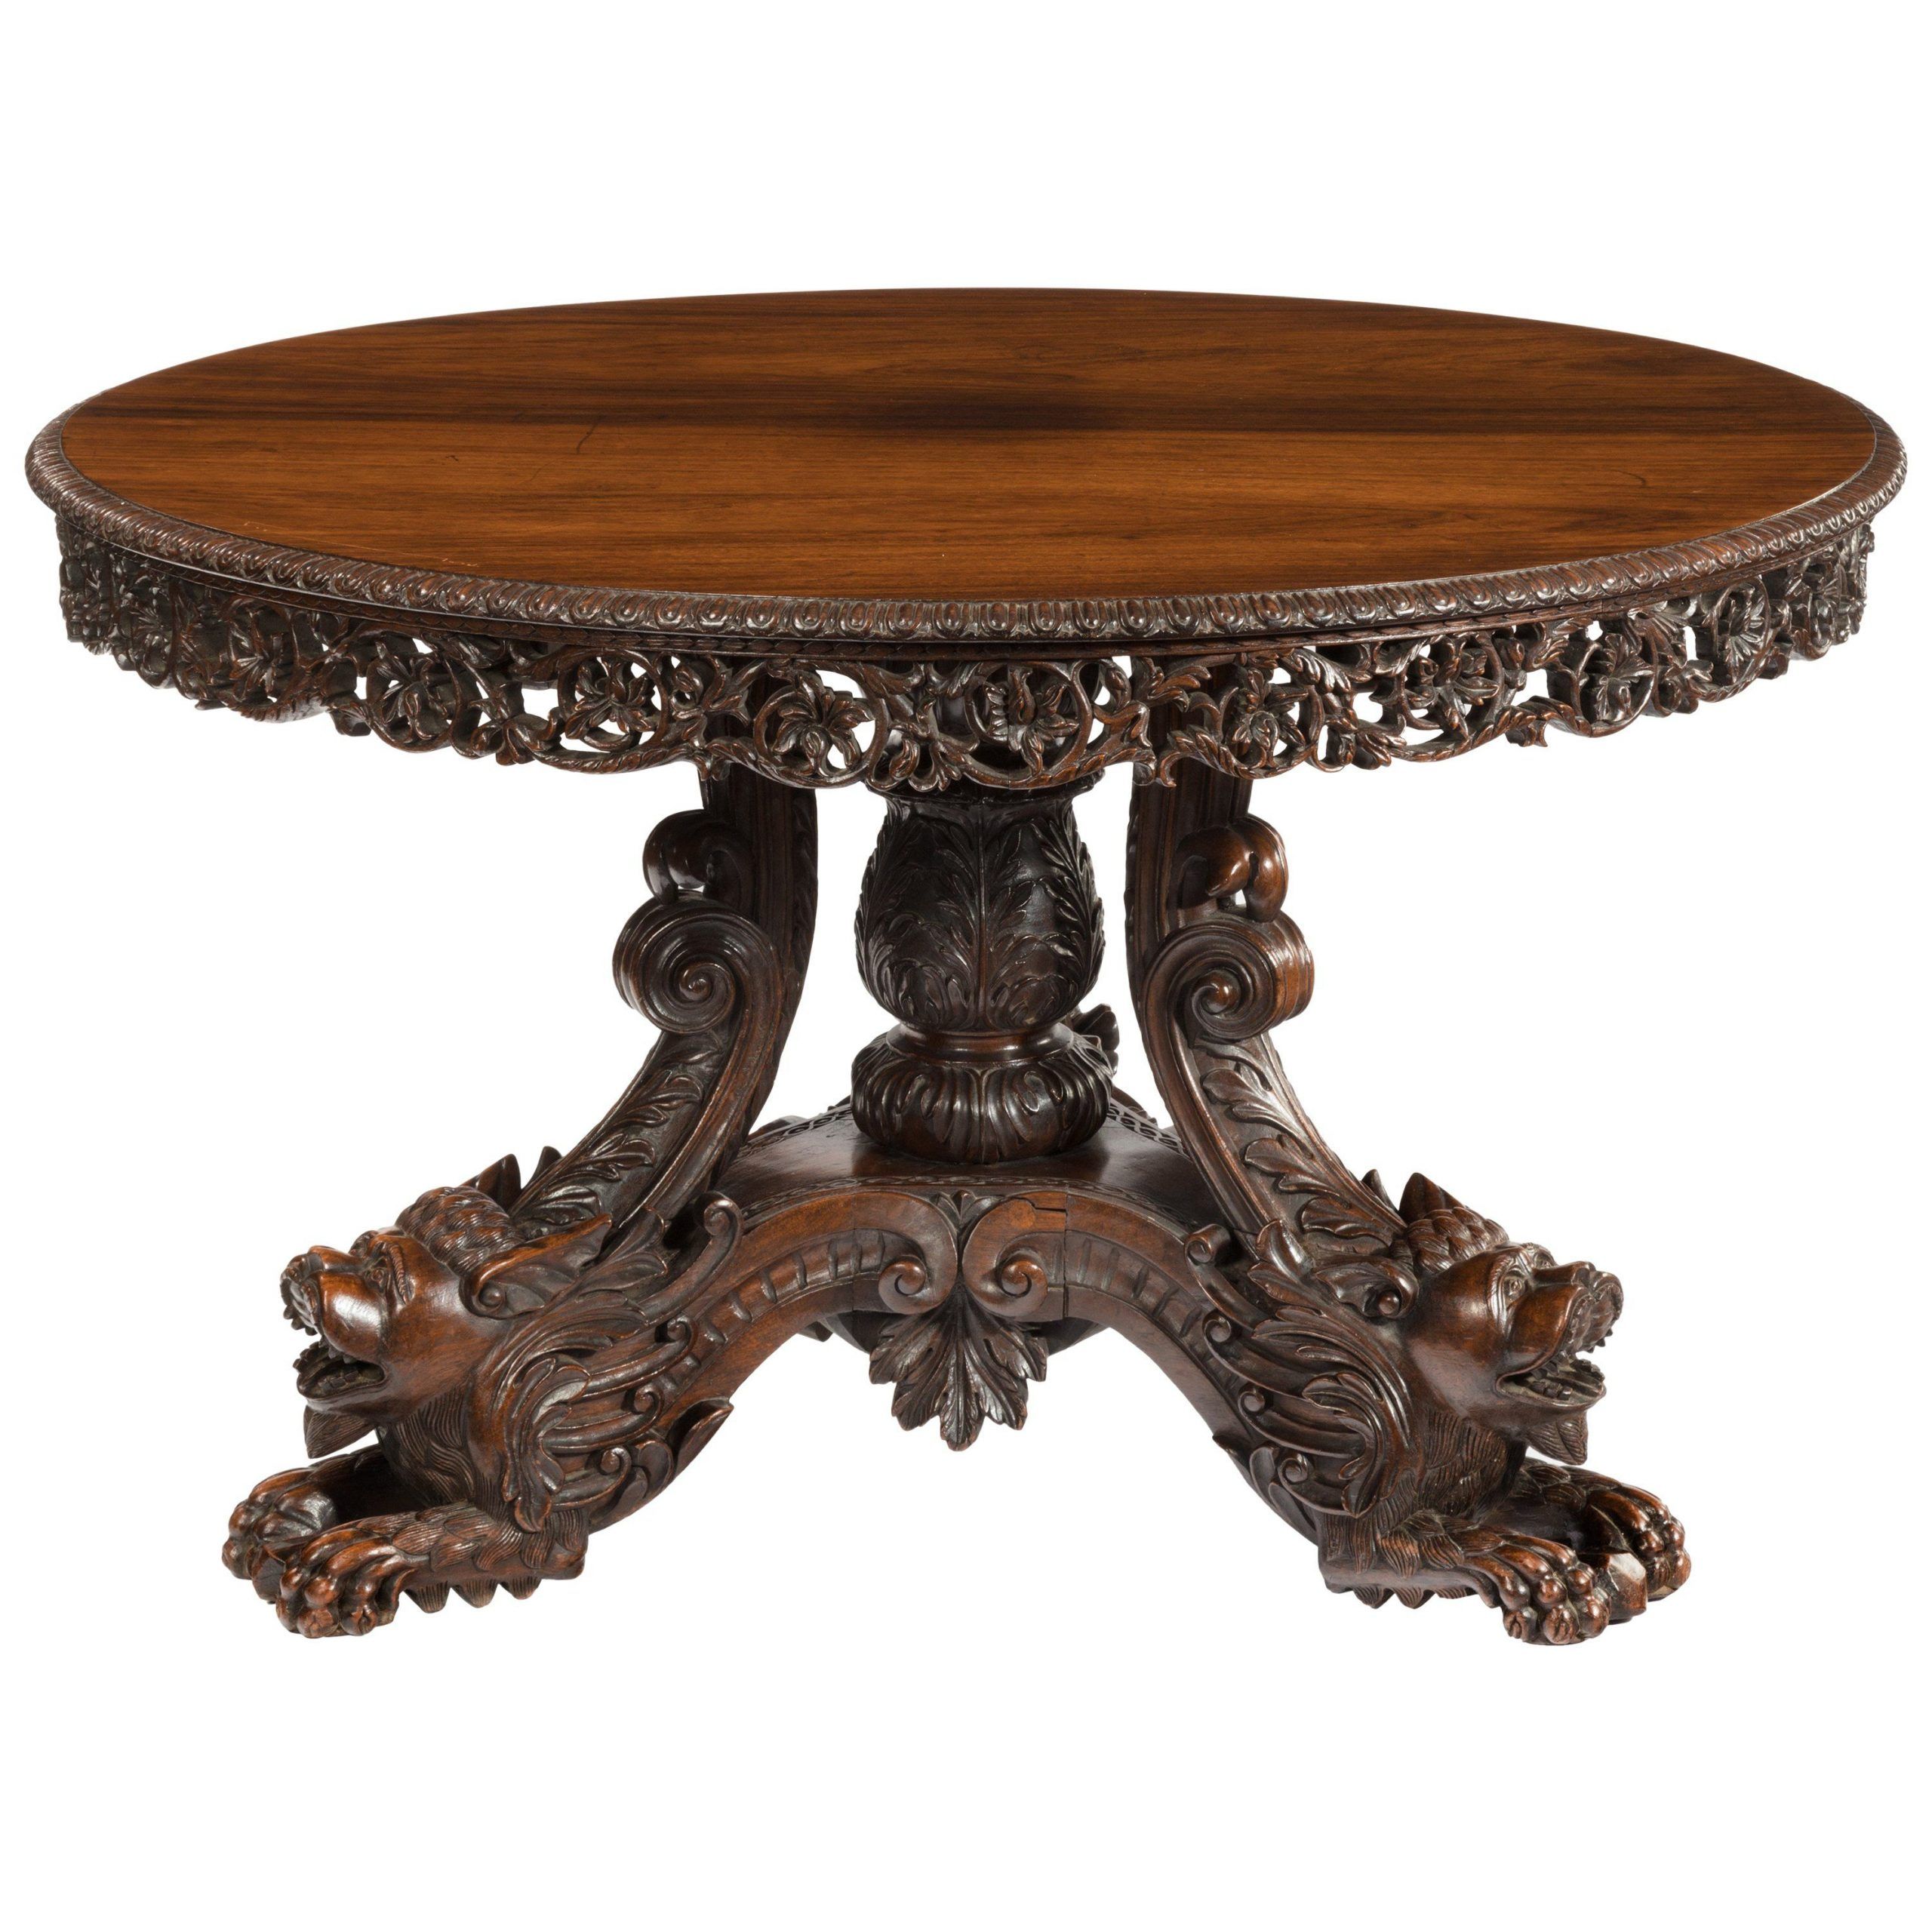 Image Result For Sri Lankan Specimen Table Sold At Throughout Favorite Christie Round Marble Dining Tables (View 8 of 25)